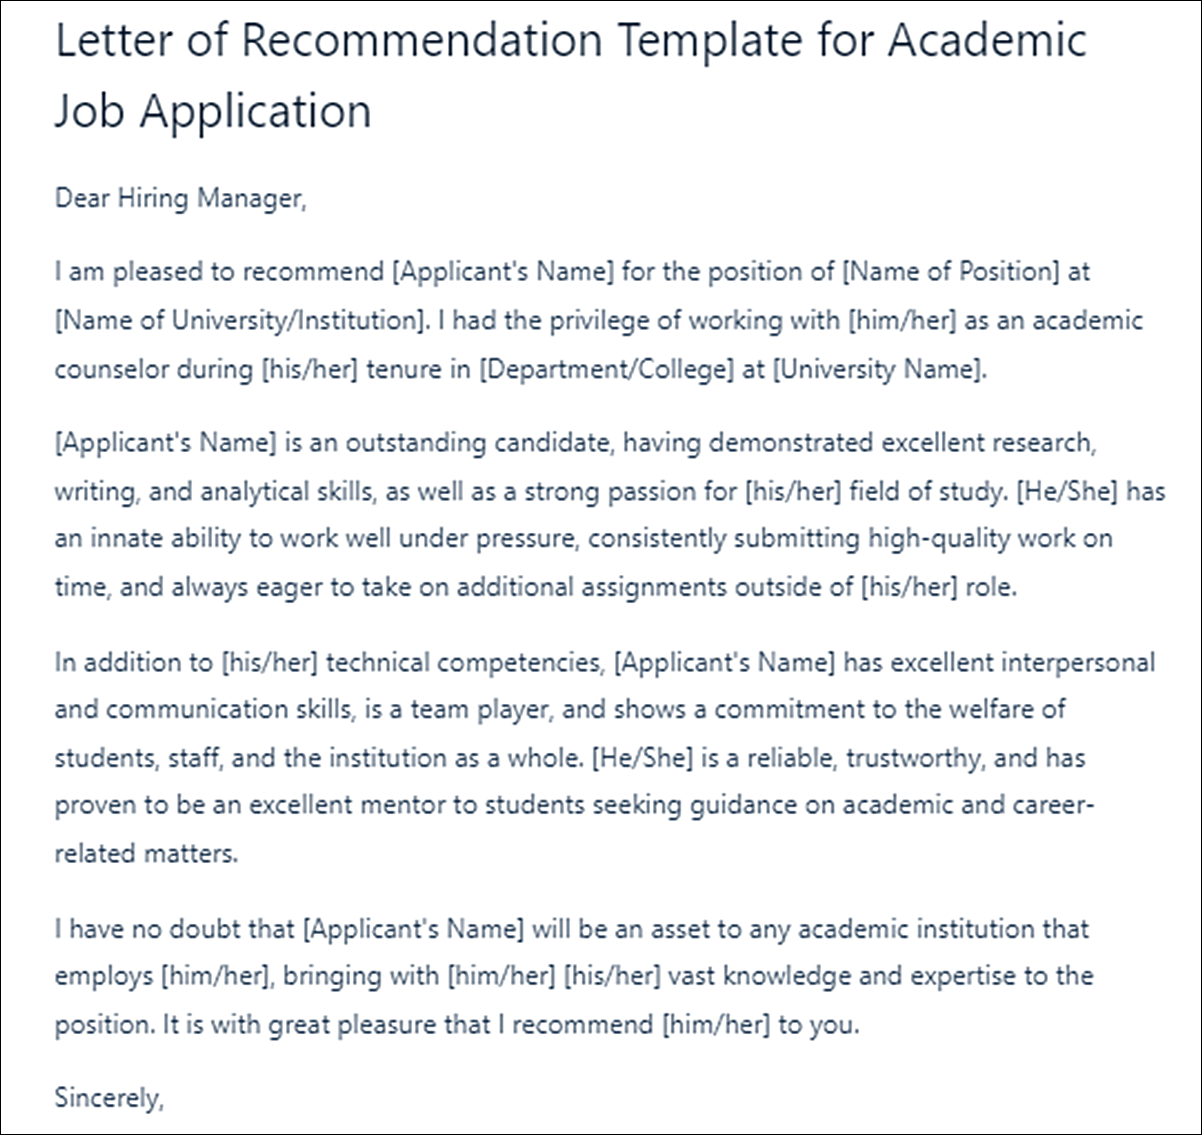 Academic Counselor Position Letter of Recommendation Template